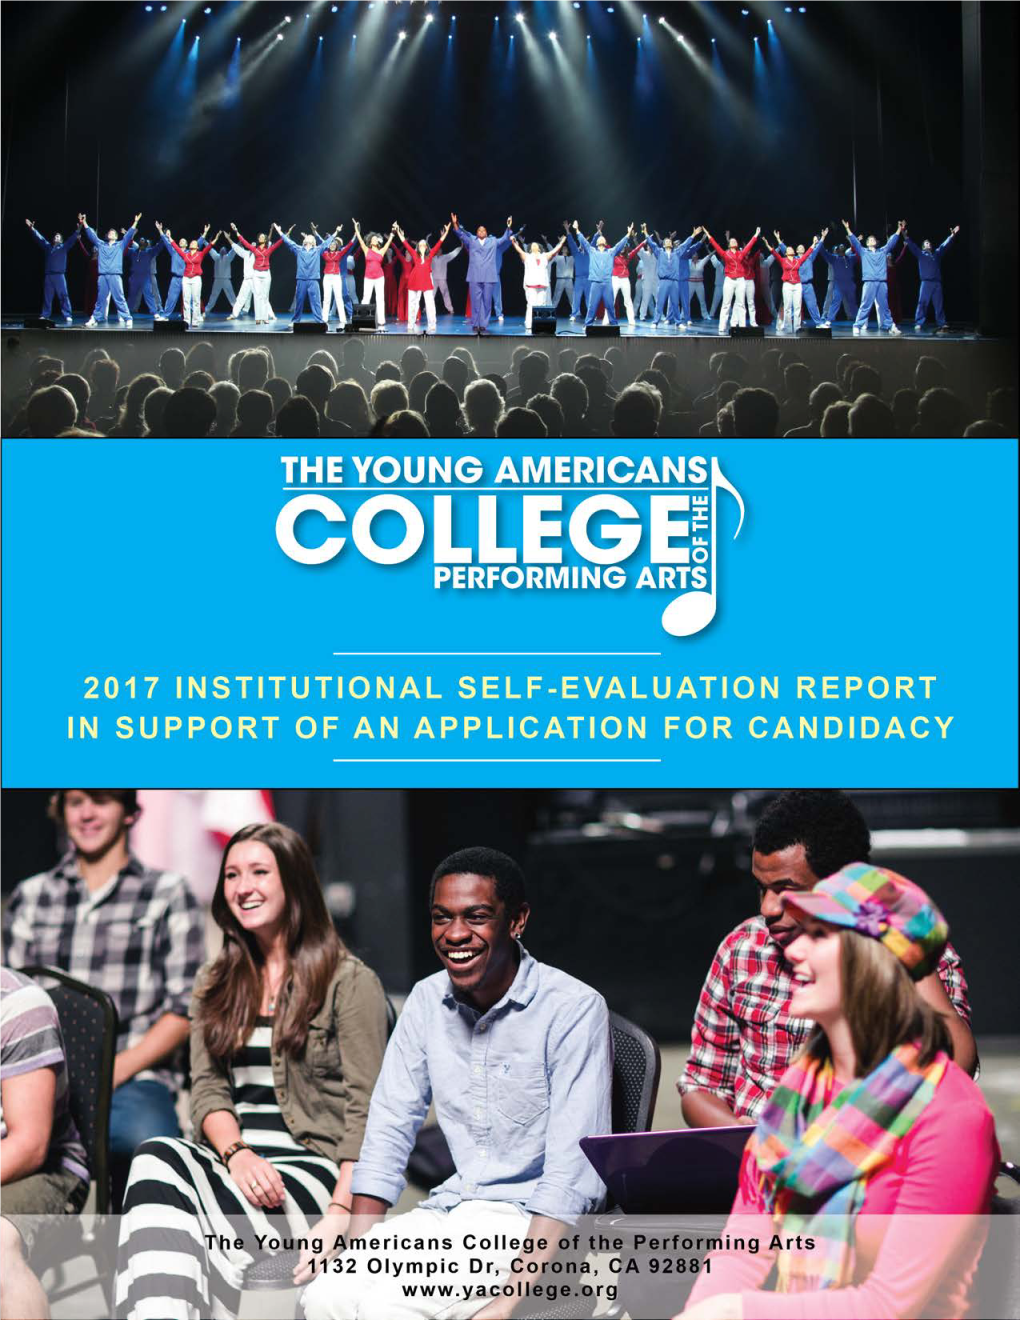 2017 Institutional Self-Evaluation Report in Support of an Application for Candidacy